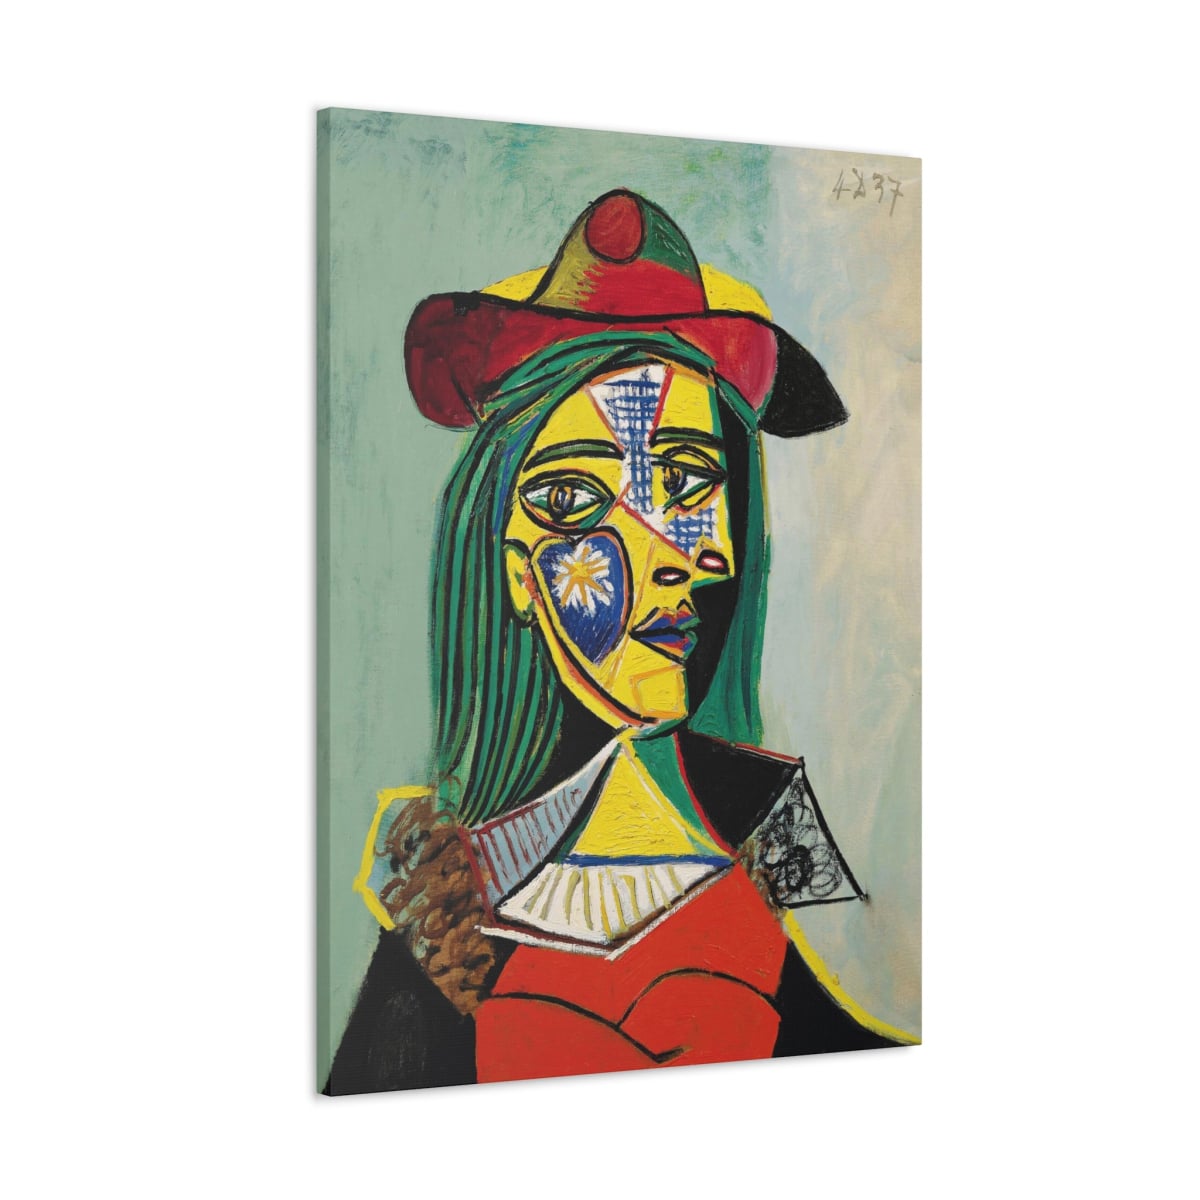 The Woman in Hat and Fur Collar - A Pablo Picasso Masterpiece